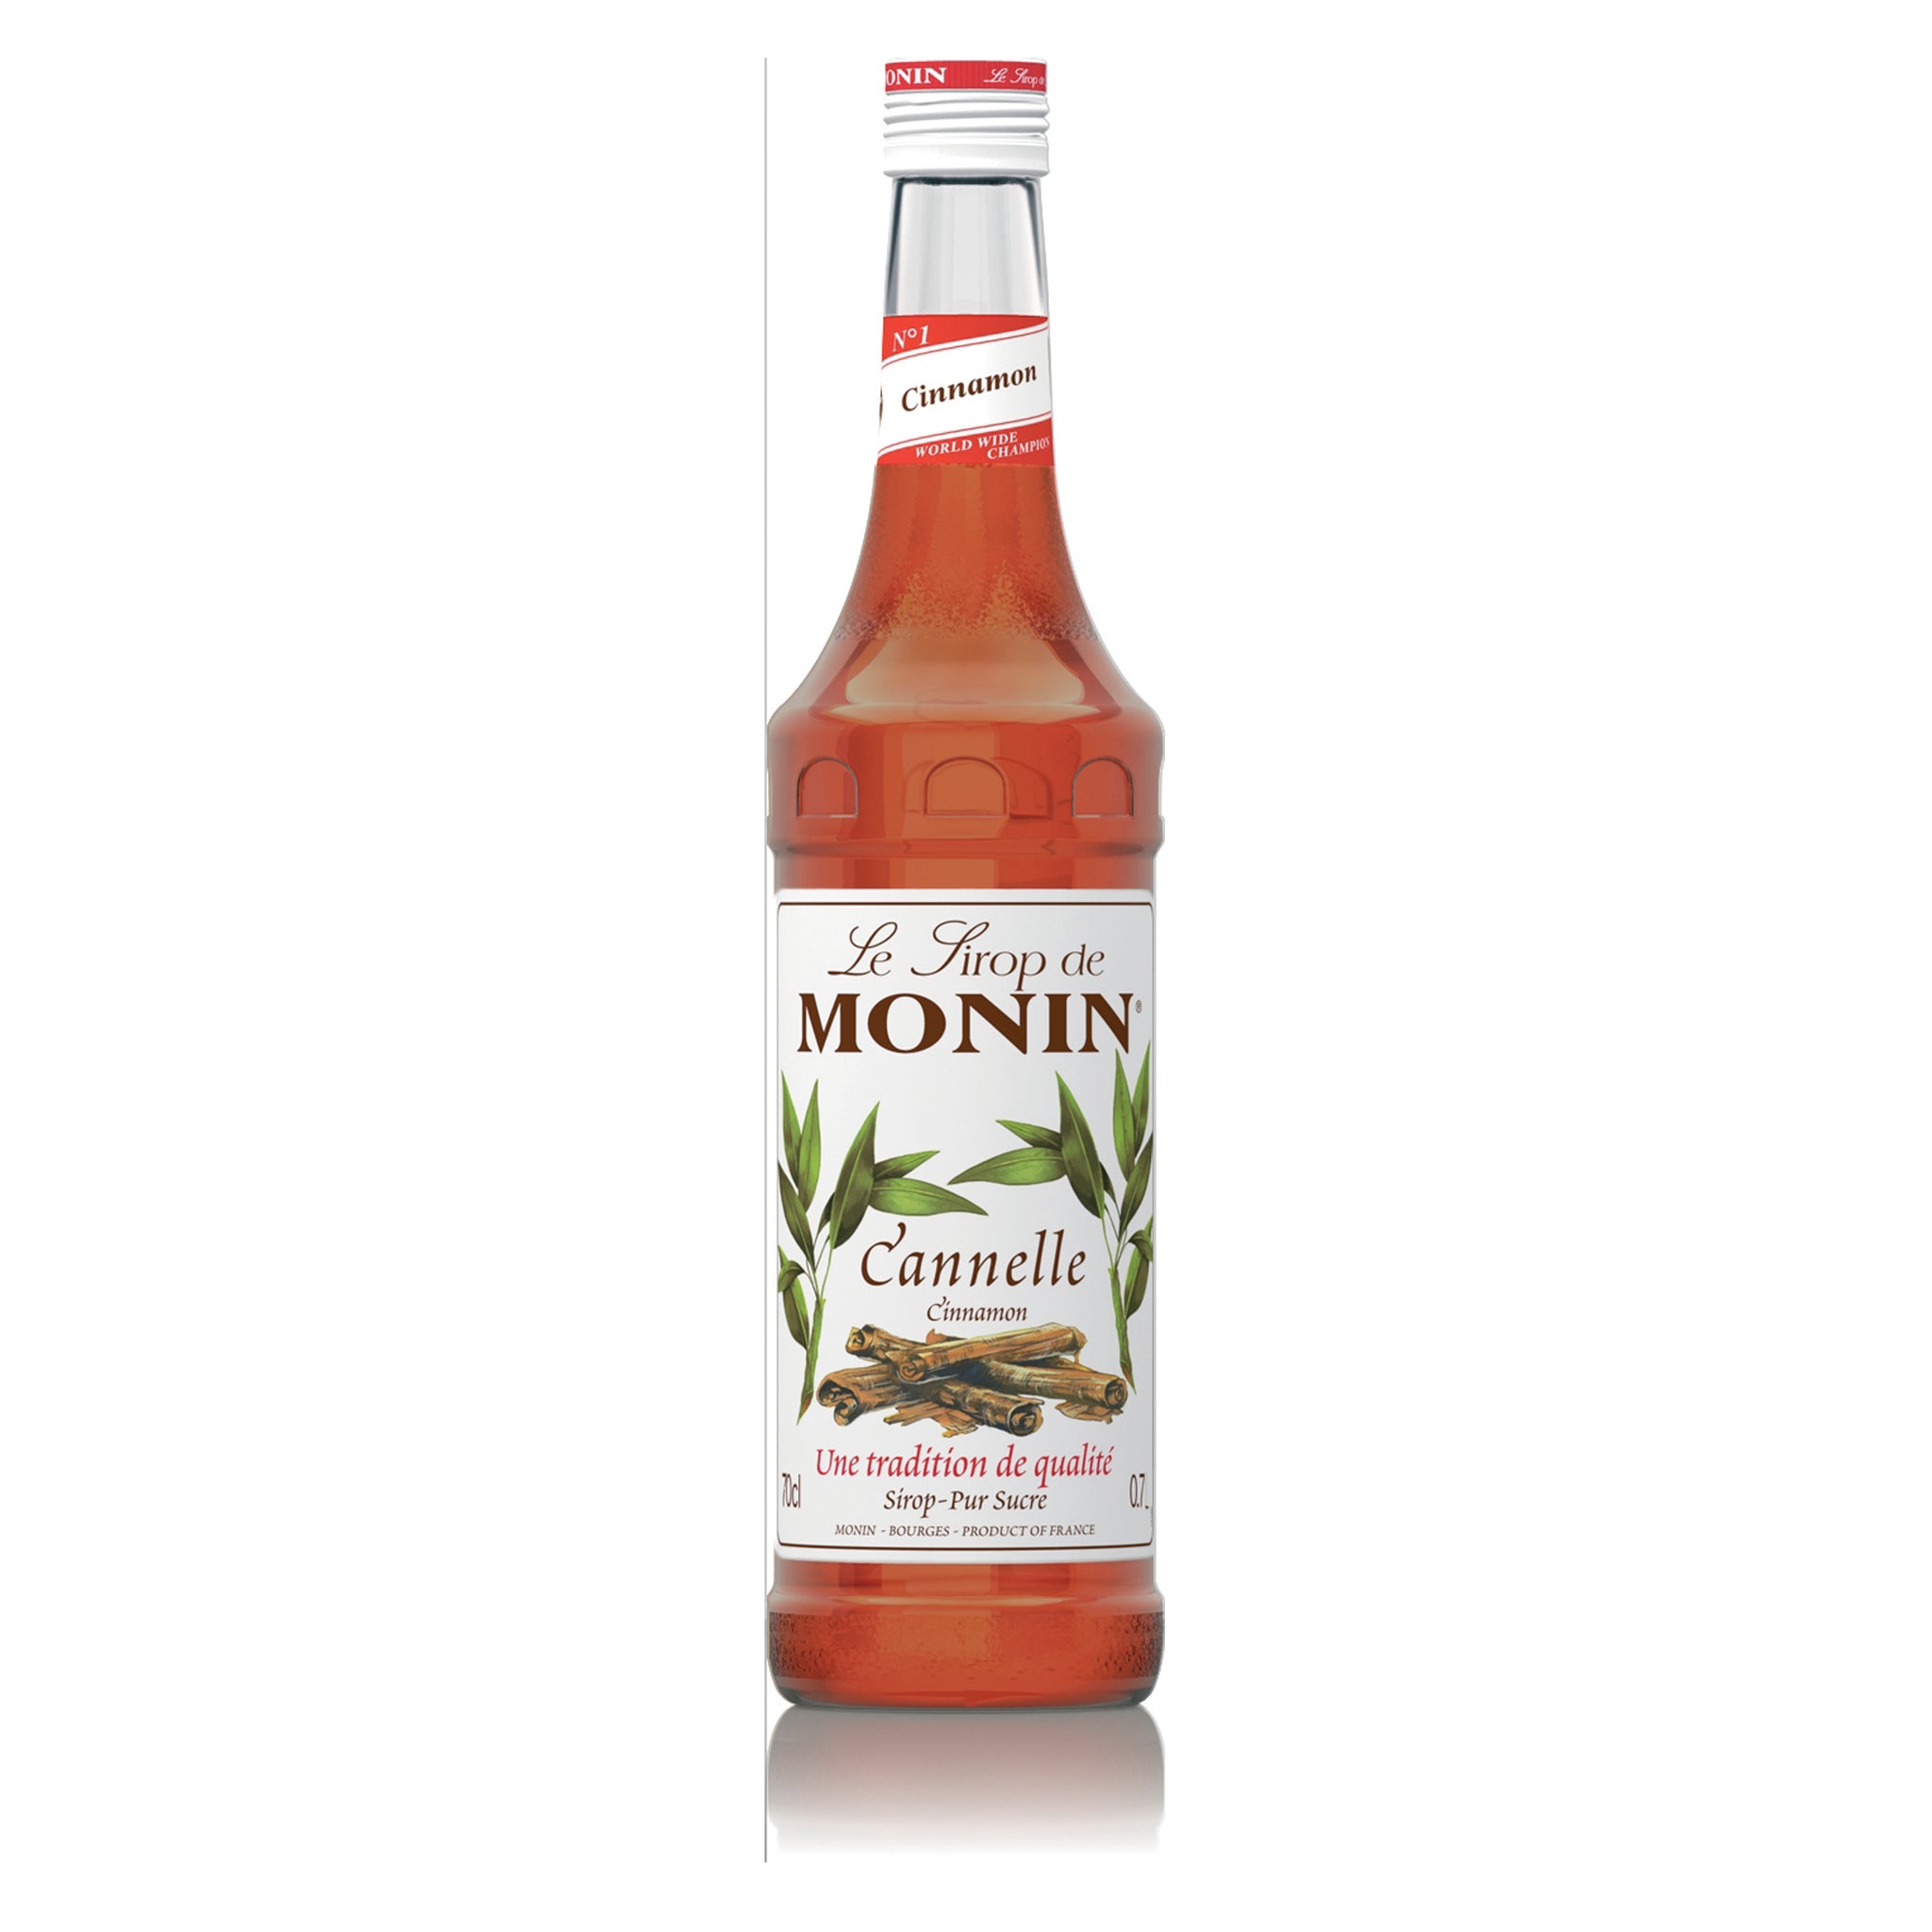 A 70cl glass bottle of MONIN Cinnamon (Cannelle) Syrup. 